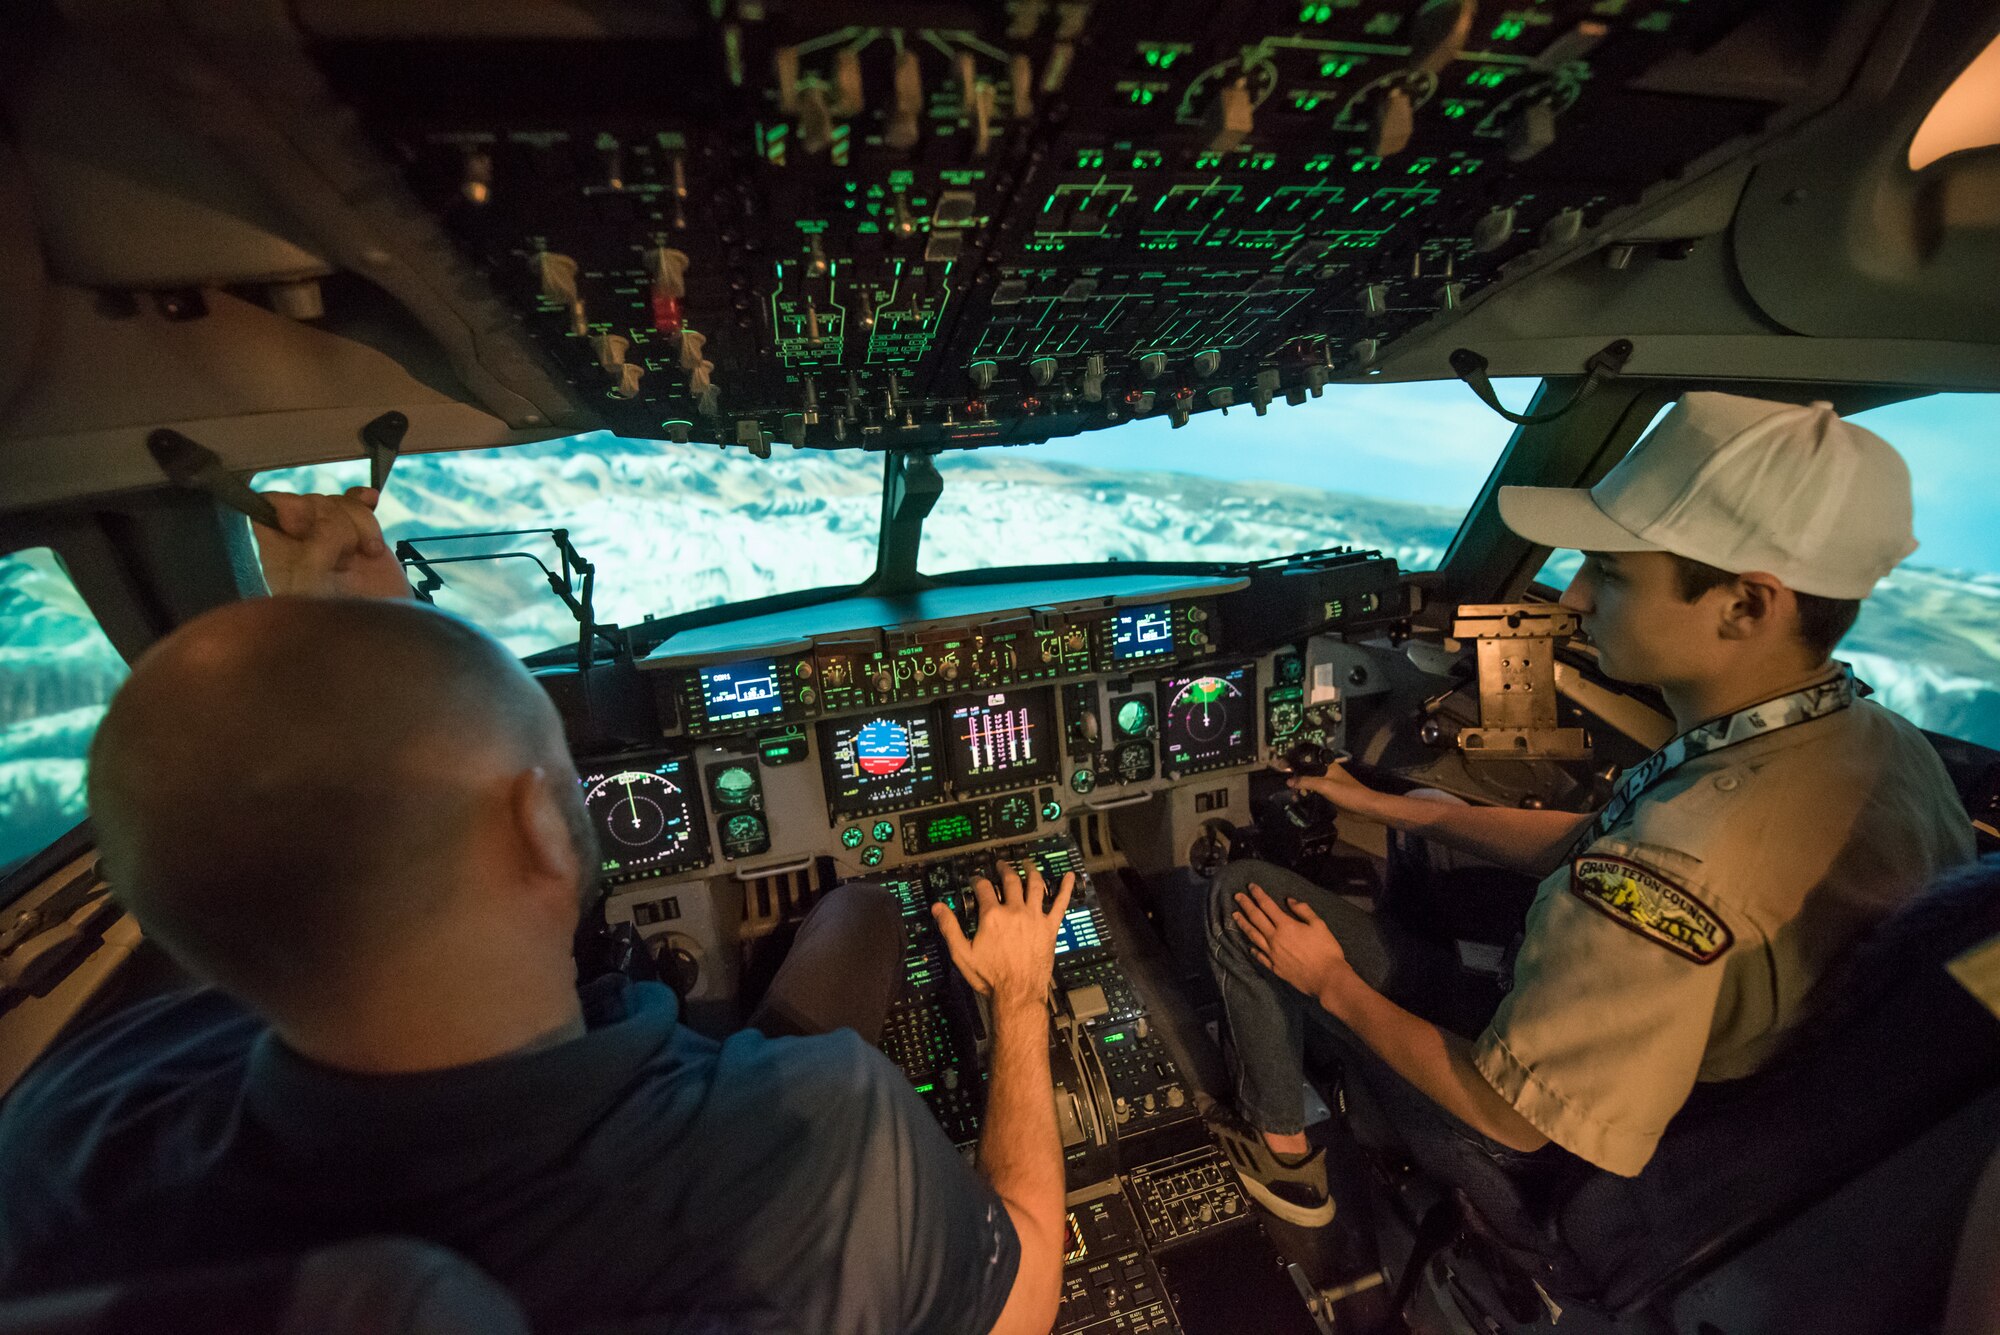 A Boy Scout utilizes a C-17 Globemaster III aircraft flight simulator during a tour of Al Udeid Air Base, Qatar, April 20, 2018. The two-day visit, which was collaboratively coordinated by the 379th Air Expeditionary Wing and Qatar Emiri Air Force, provided the scouts a chance to earn merit badges, including the Aviation Merit Badge. (U.S. Air Force photo by Staff Sgt. Joshua Horton)